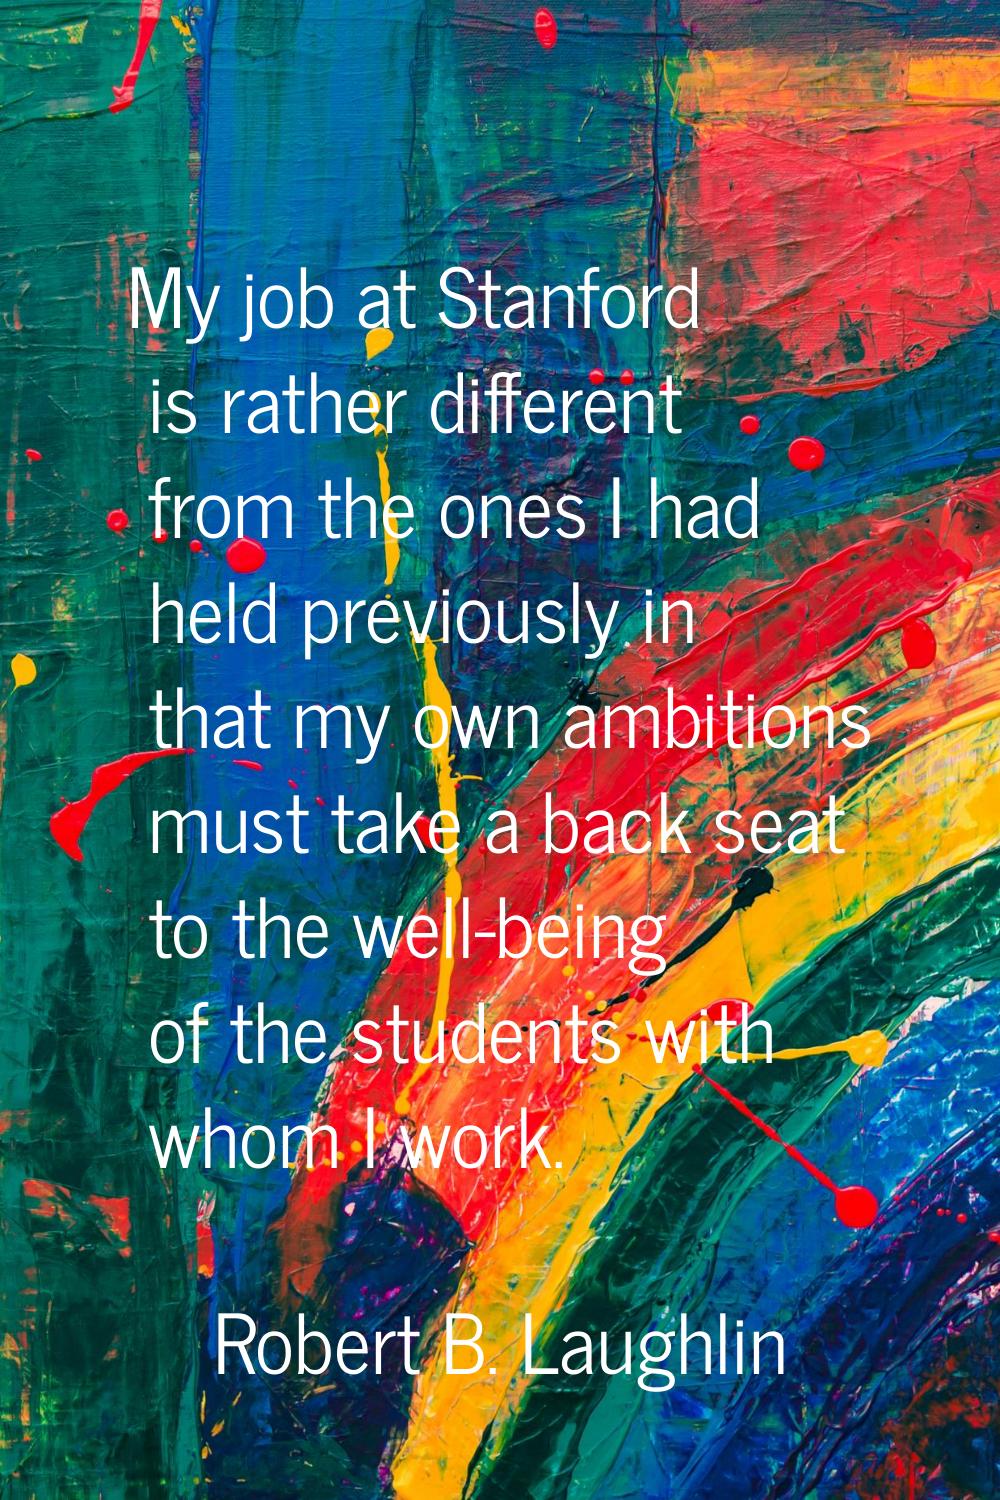 My job at Stanford is rather different from the ones I had held previously in that my own ambitions